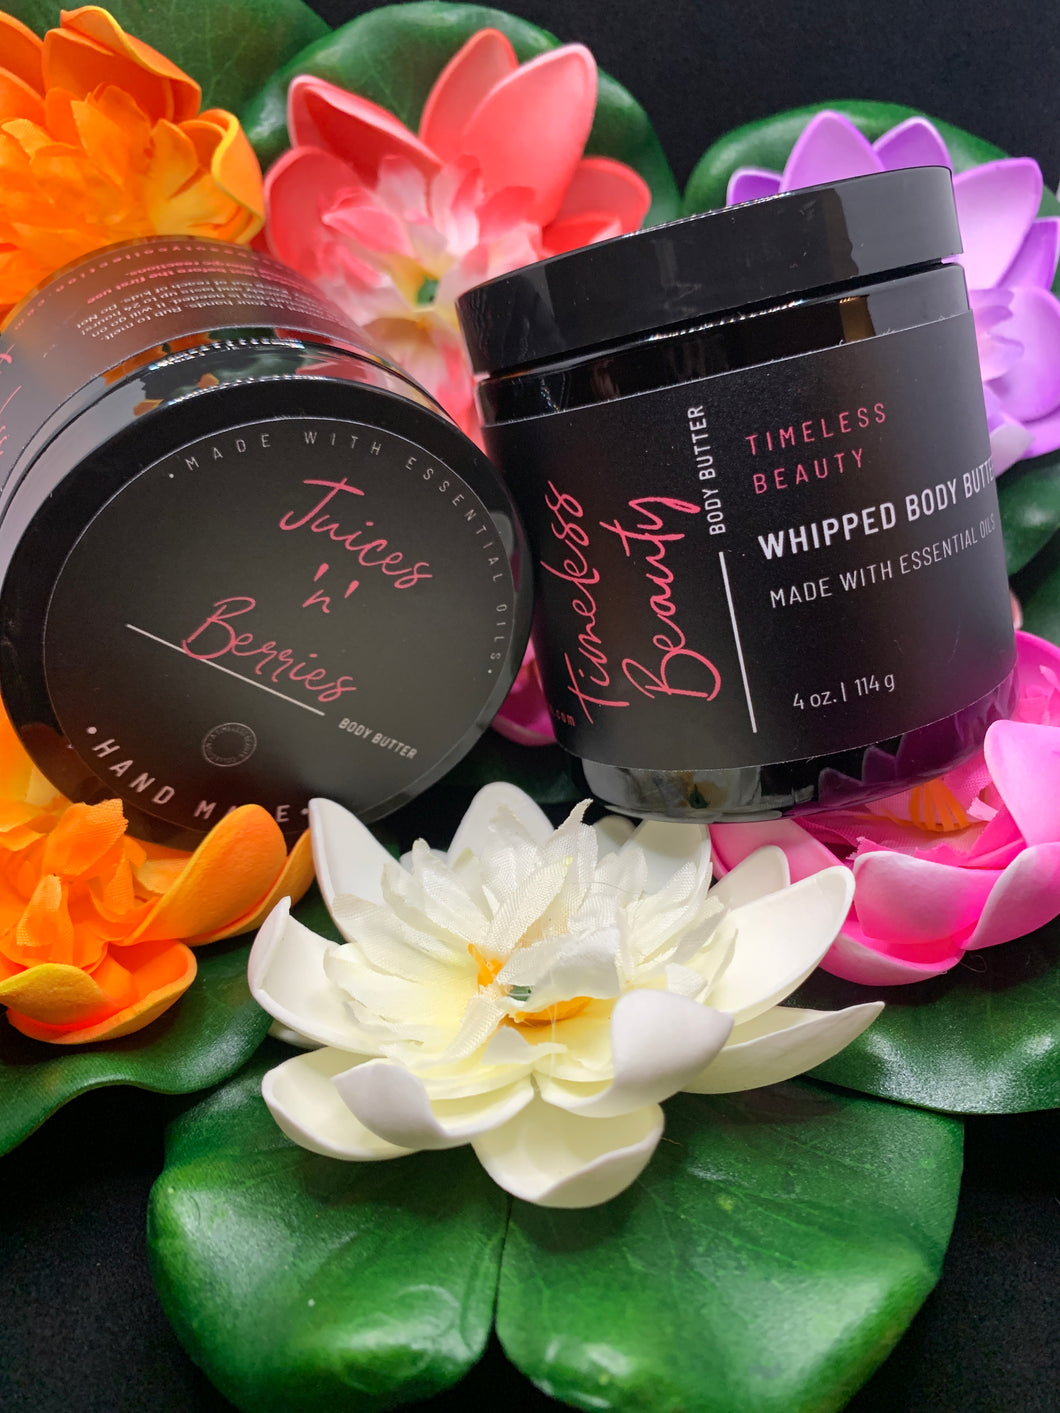 Juices 'n' Berries Whipped Body Butter